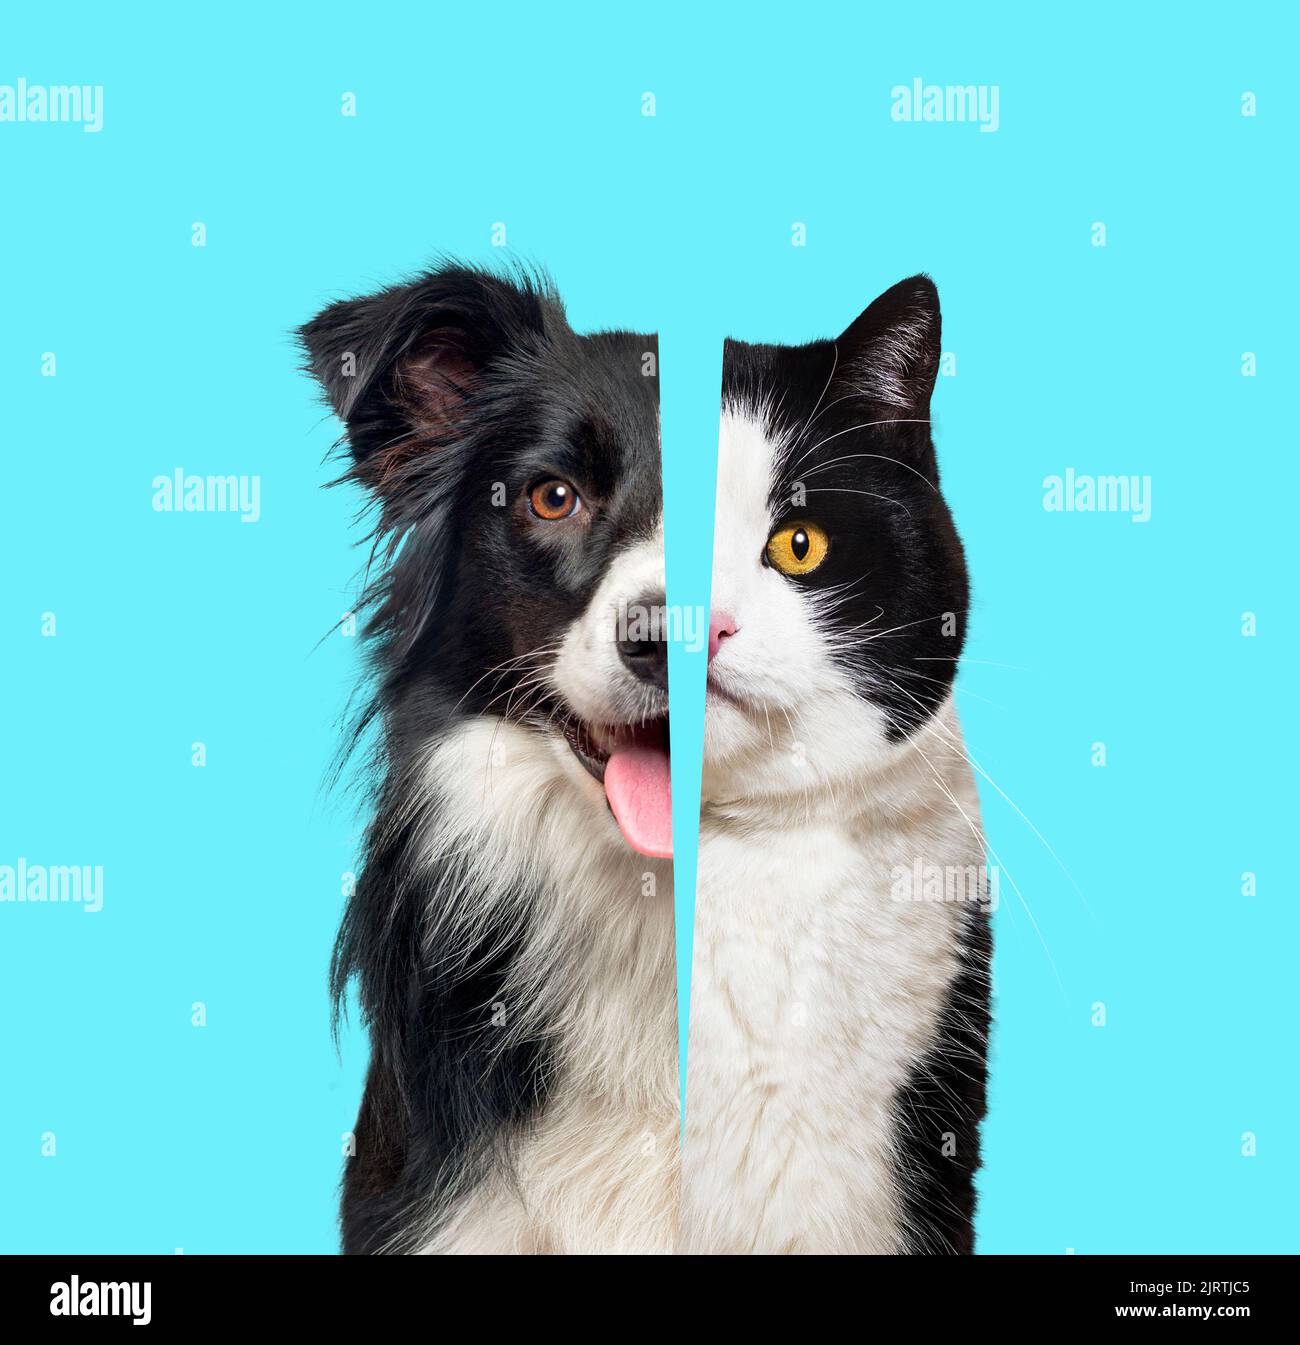 Picture showing the difference between the head of a dog and that of a cat, Head shot side by side against blue background Stock Photo